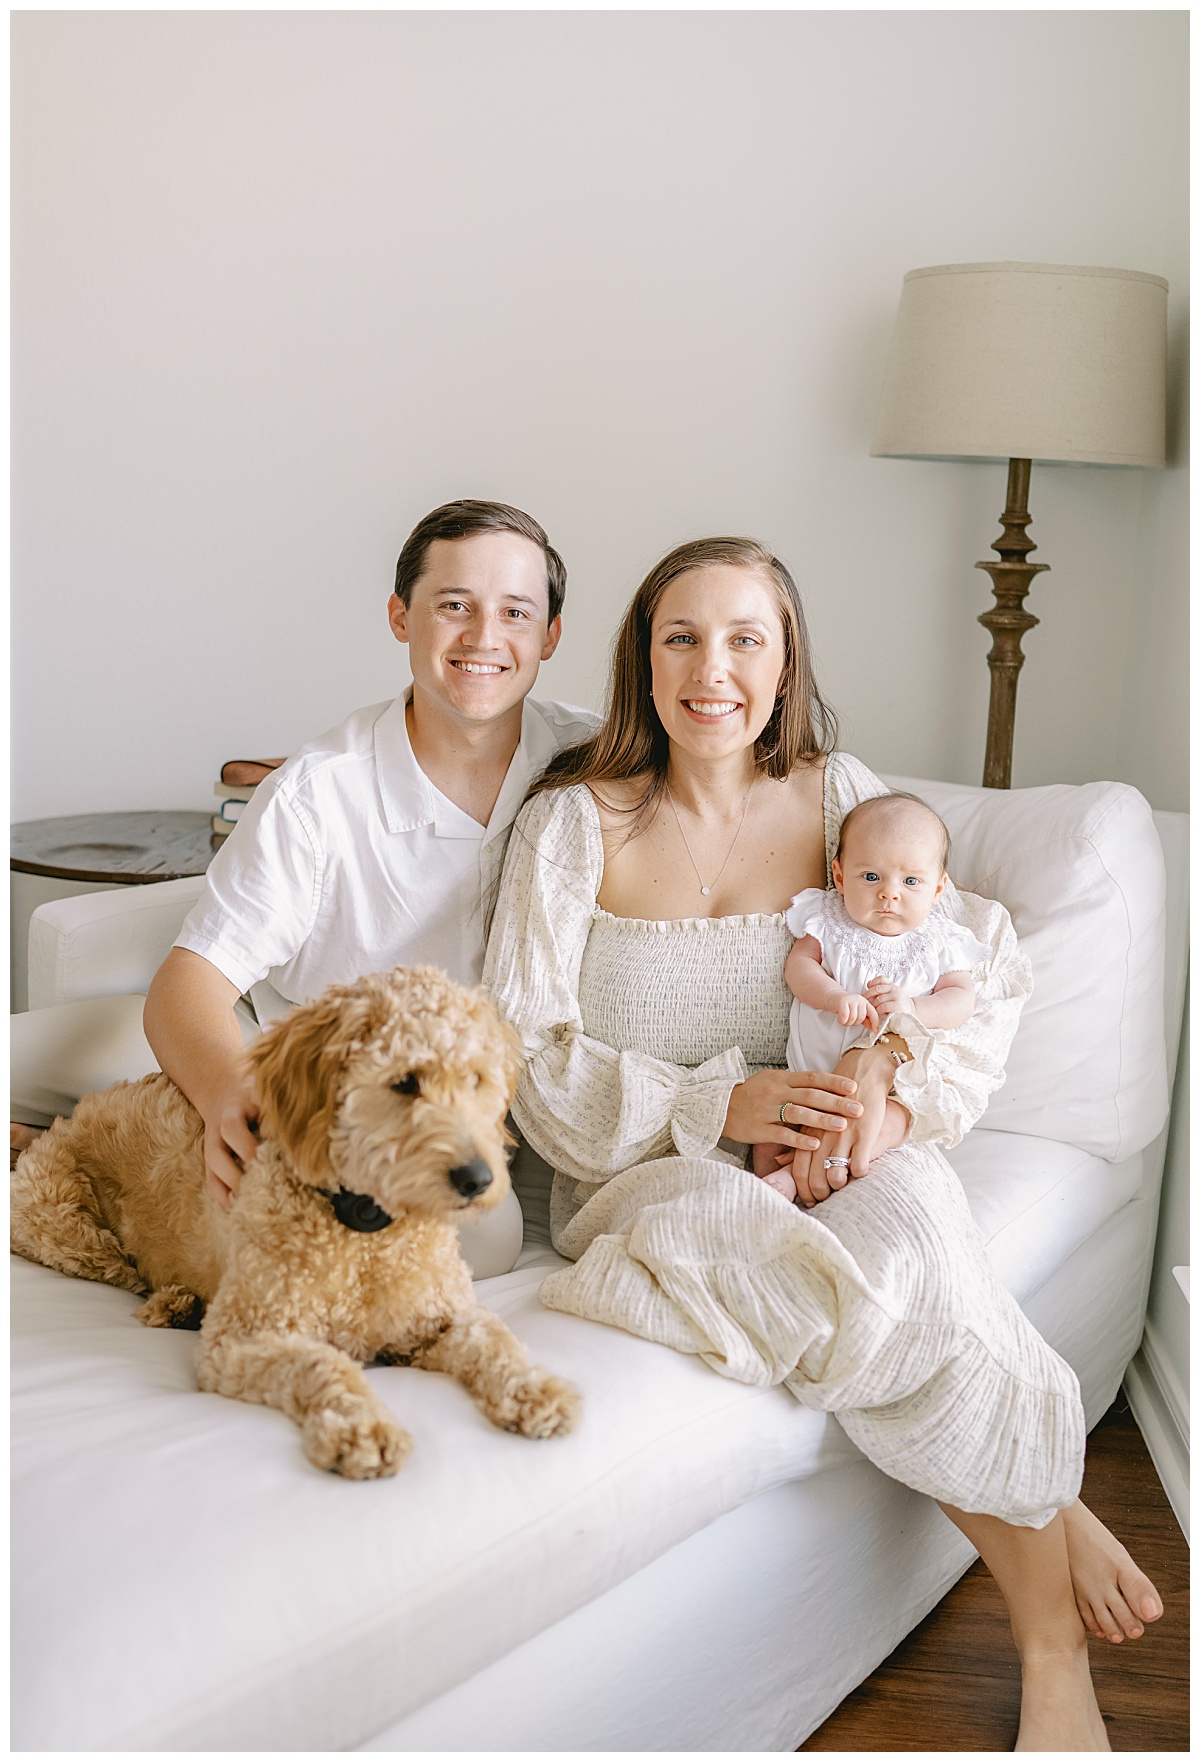 Mom and dad sit on chaise lounge with newborn baby girl and Goldendoodle for their in-home newborn pictures in San Antonio, TX taken by Teressa Jane Photography, a San Antonio Newborn Photographer.